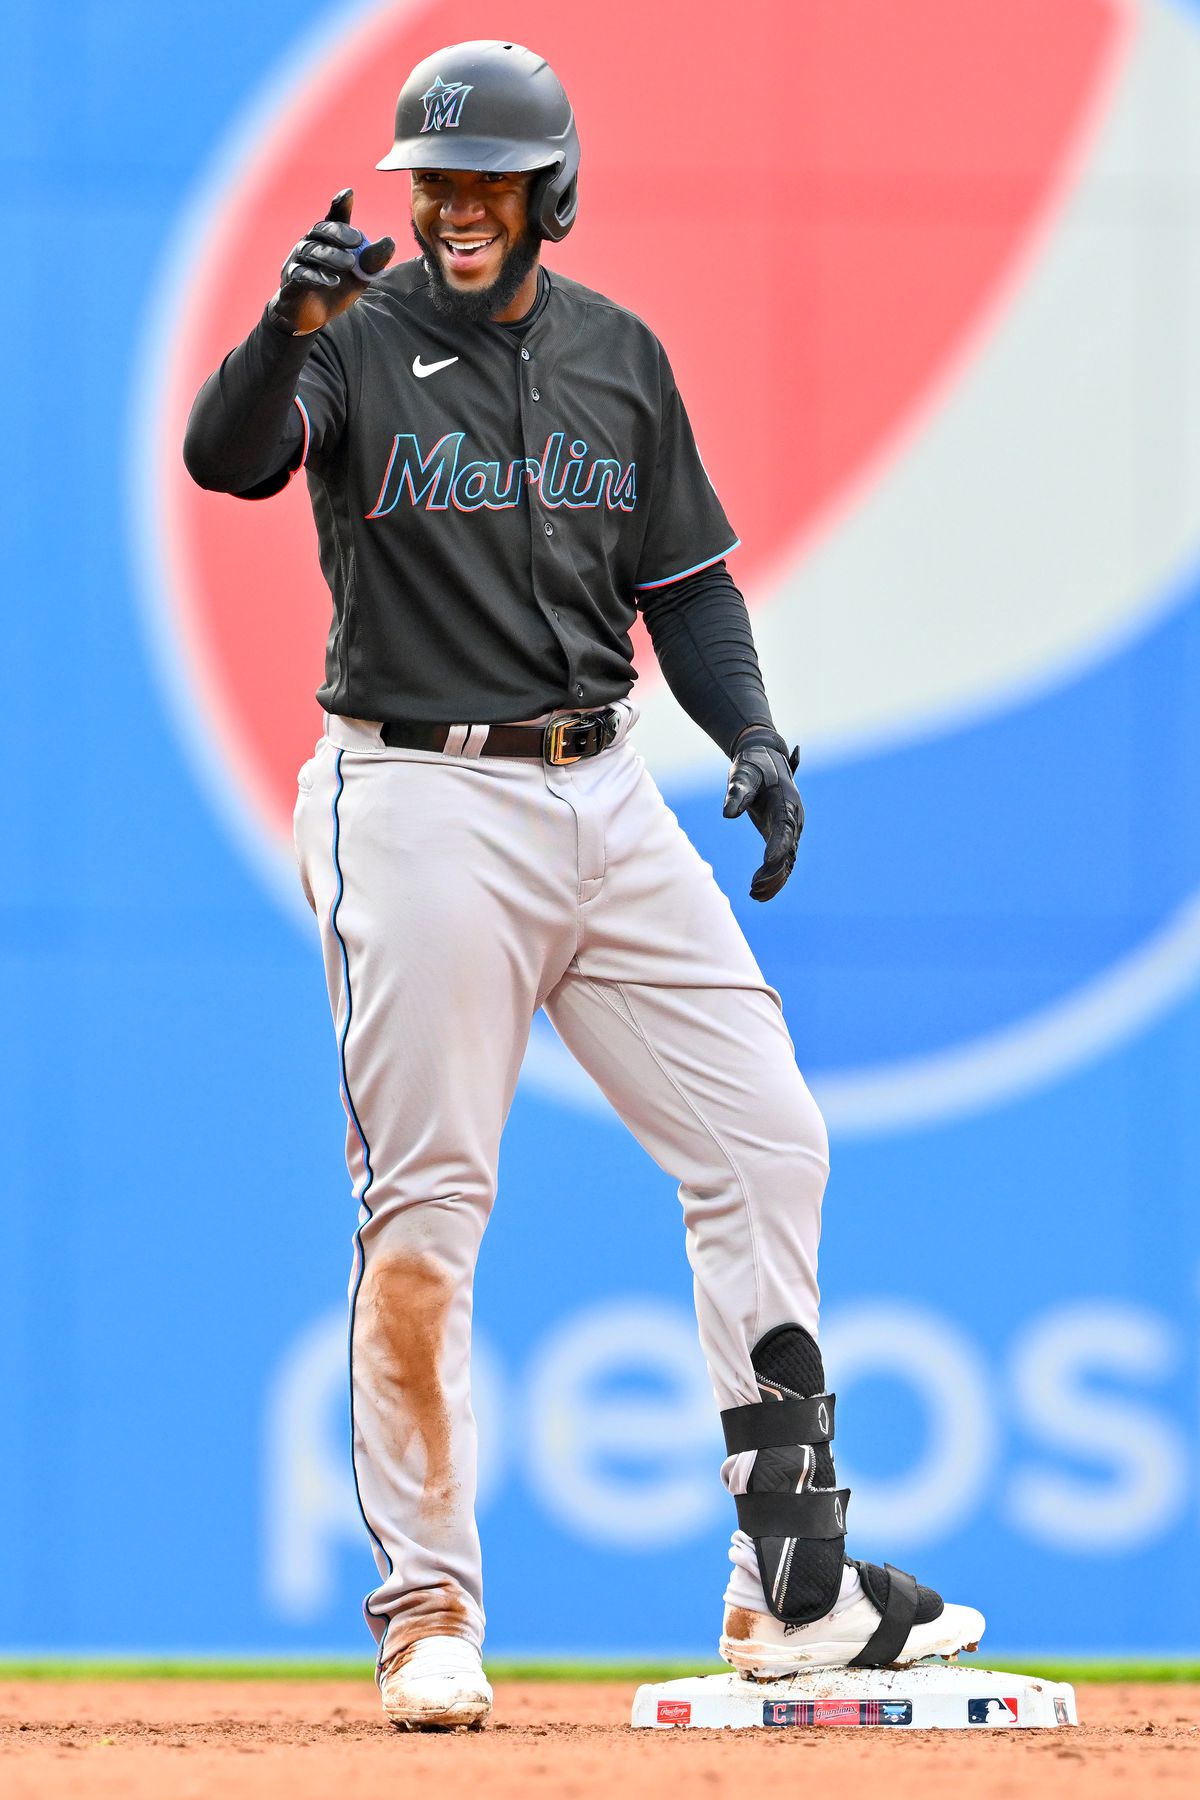 Bryan De La Cruz #14 of the Miami Marlins celebrates after hitting a double during the seventh inning of the first game of a doubleheader against the Cleveland Guardians at Progressive Field on April 22, 2023 in Cleveland, Ohio.